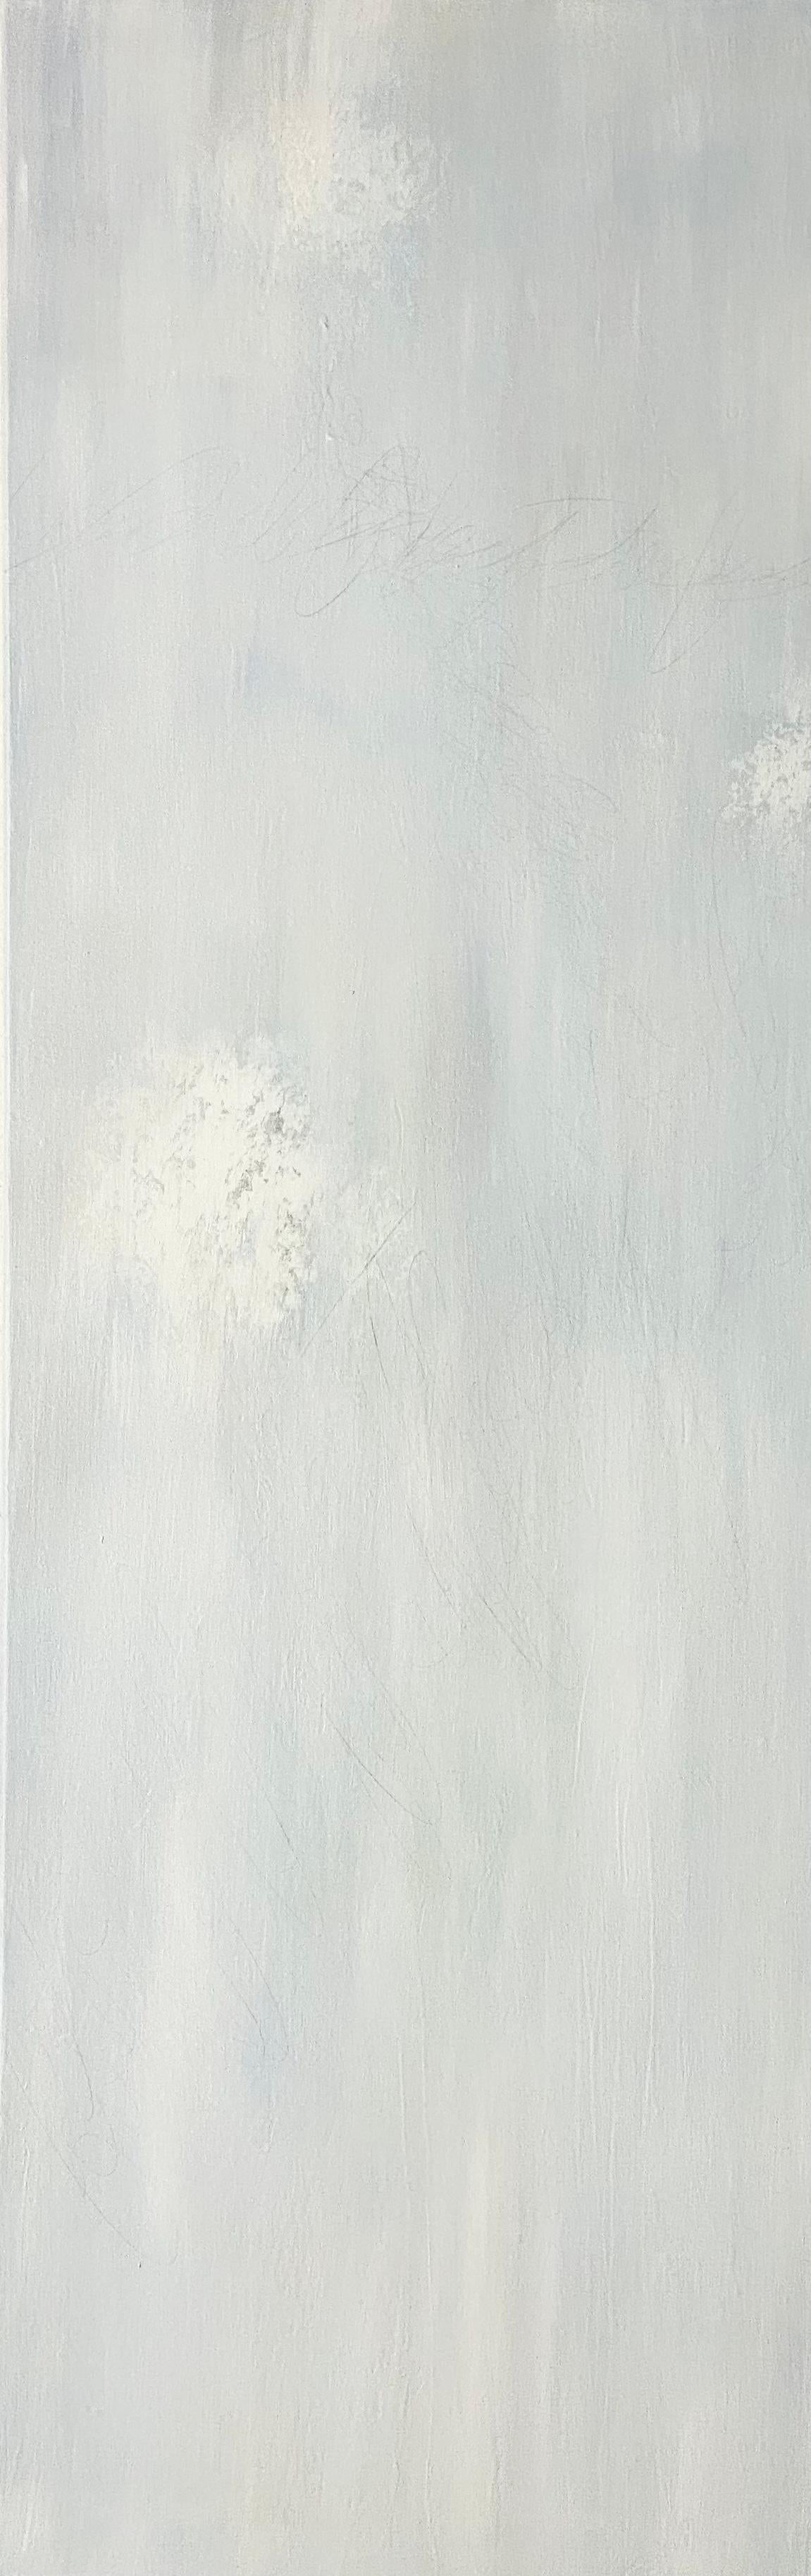 For simplicity’s sake, Contemporary, classic, Triptych, white on white, 3 panels - Painting by Juanita Bellavance 